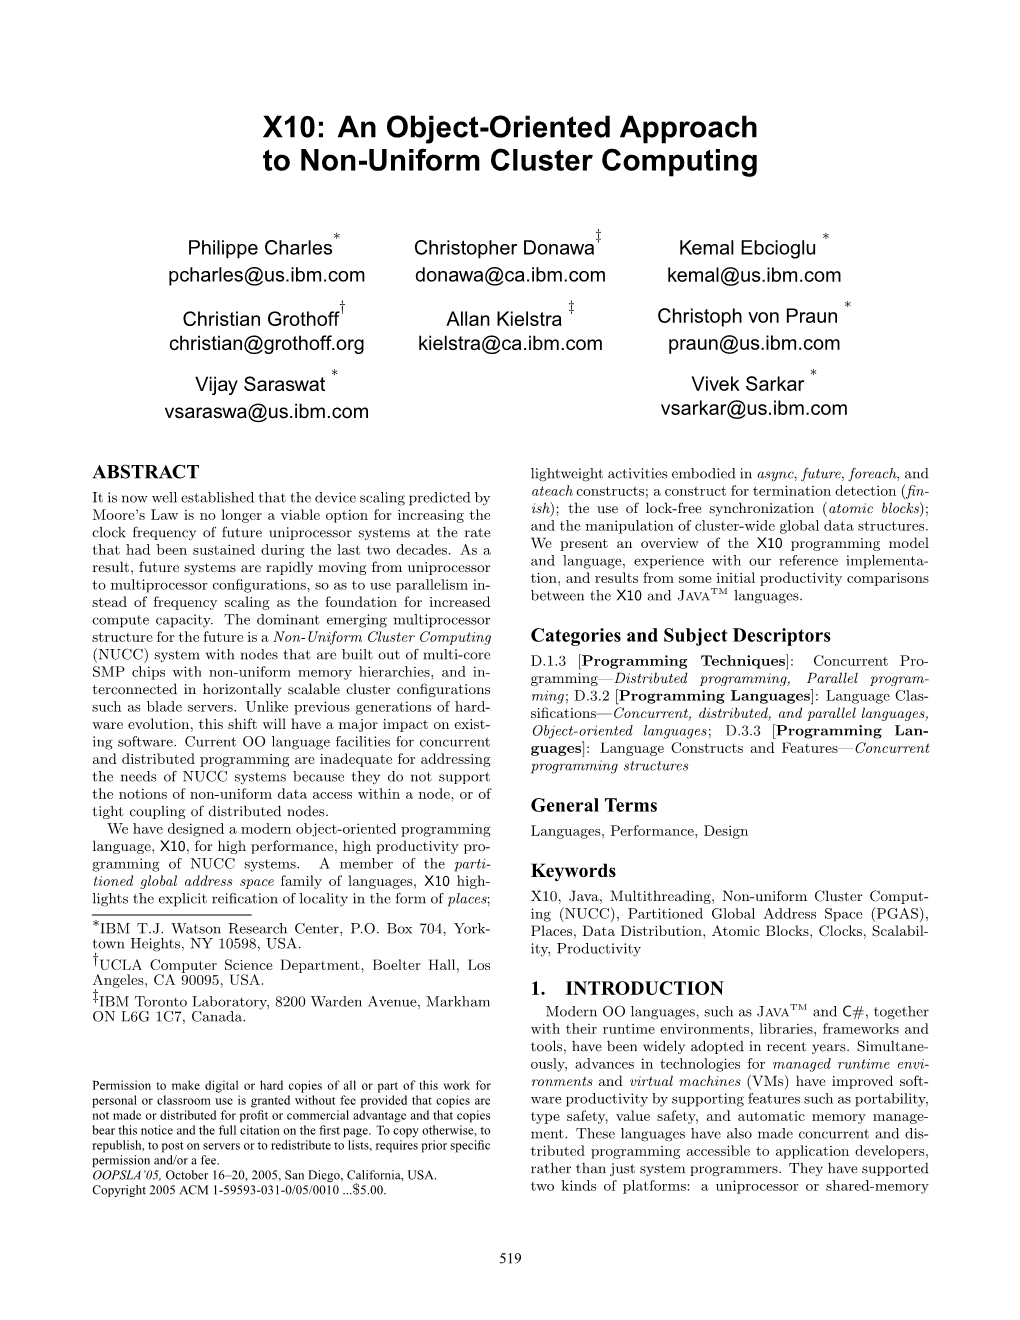 X10: an Object-Oriented Approach to Non-Uniform Cluster Computing